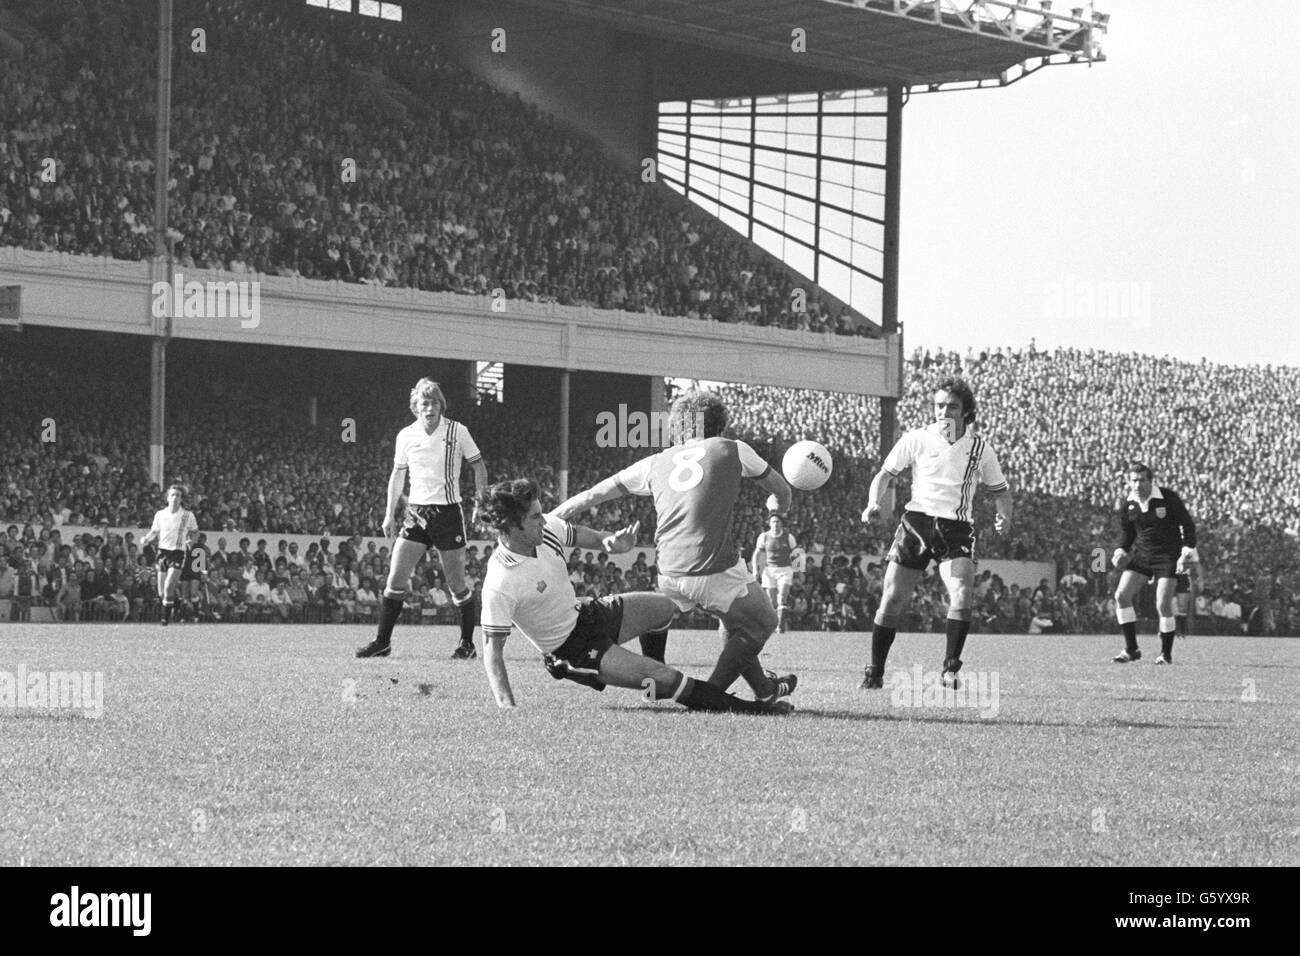 Martin Buchan of Manchester United slides in to tackle Arsenal's Alan Sunderland during a League One match at Highbury. Looking on are Manchester United players Brian Greenhoff (left) and Lou Macari. Stock Photo